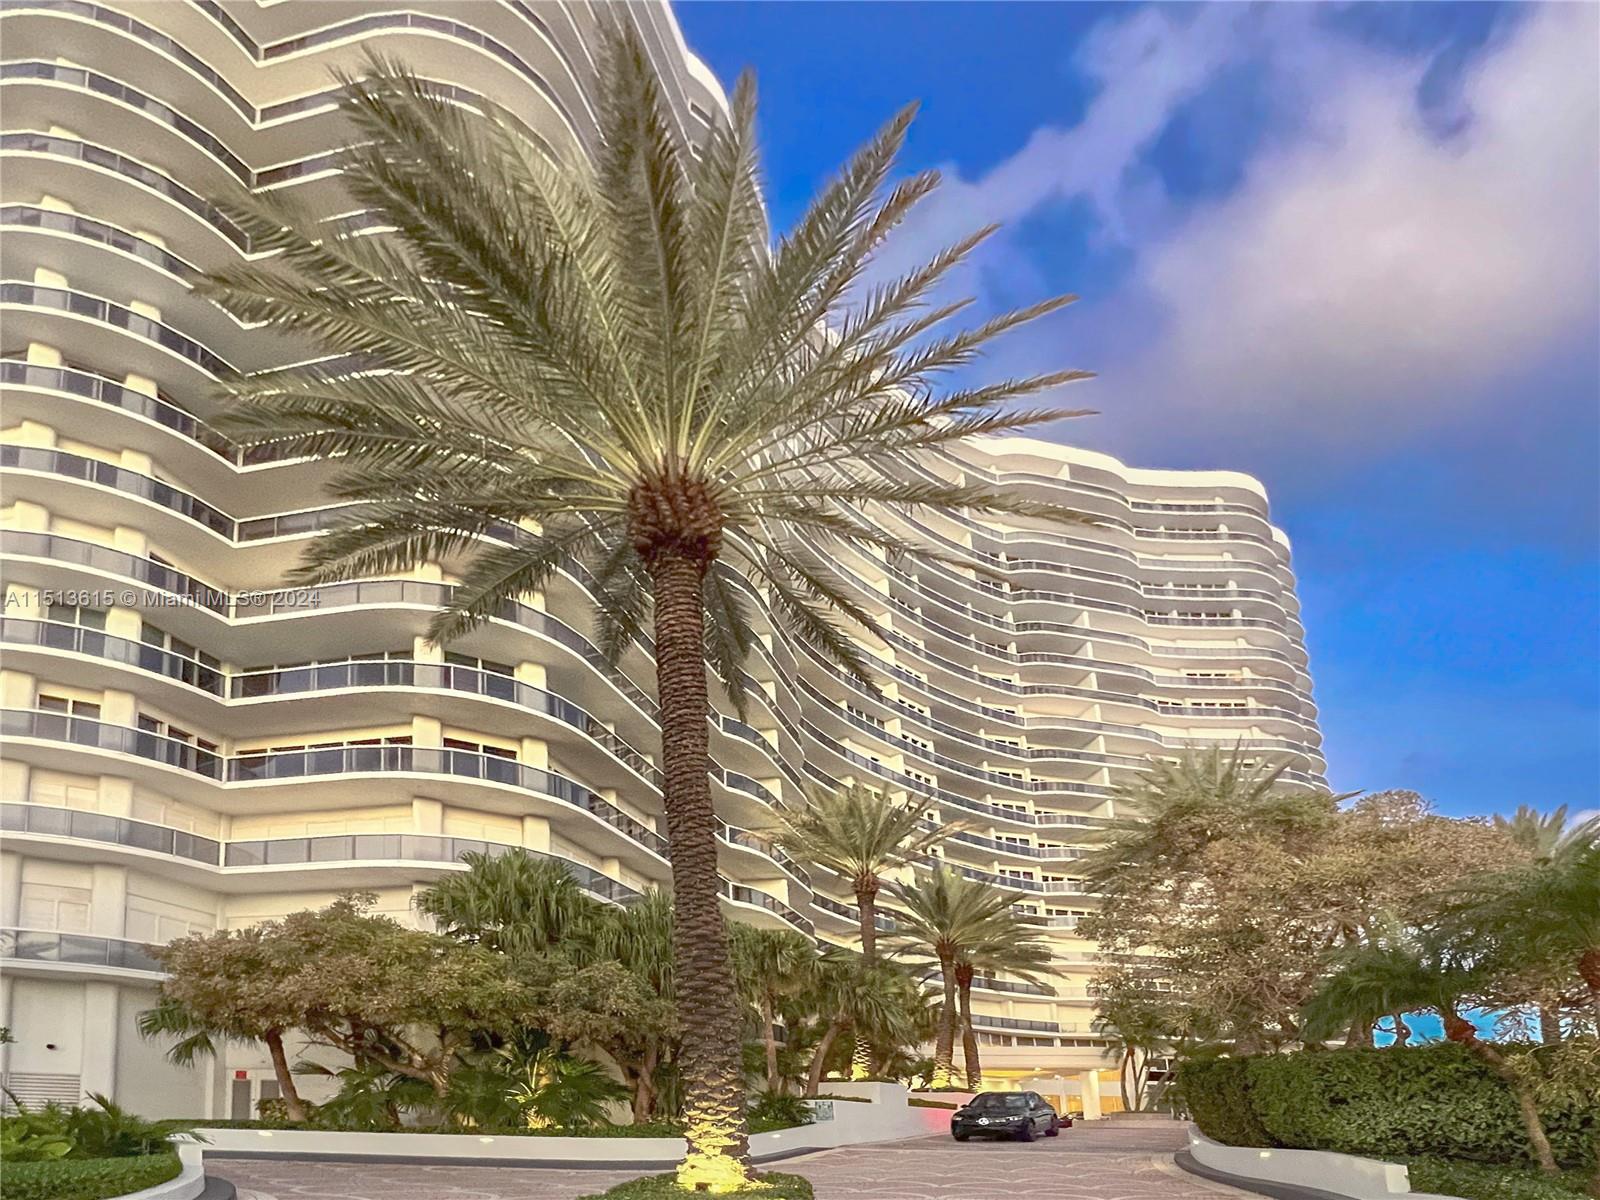 In the luxurious Majestic Tower, across from the Bal Harbour shops, this 17th-floor unit offers 2 bedrooms and a spacious Den, along with 3 full bathrooms. A large balcony provides beautiful ocean views, marble floors, and a private elevator. It includes 2 parking spaces and valet parking. Additional amenities include beach service, tennis court, gym, yoga classes, restaurant, and spa. Definitely one of the best places to live in Miami.